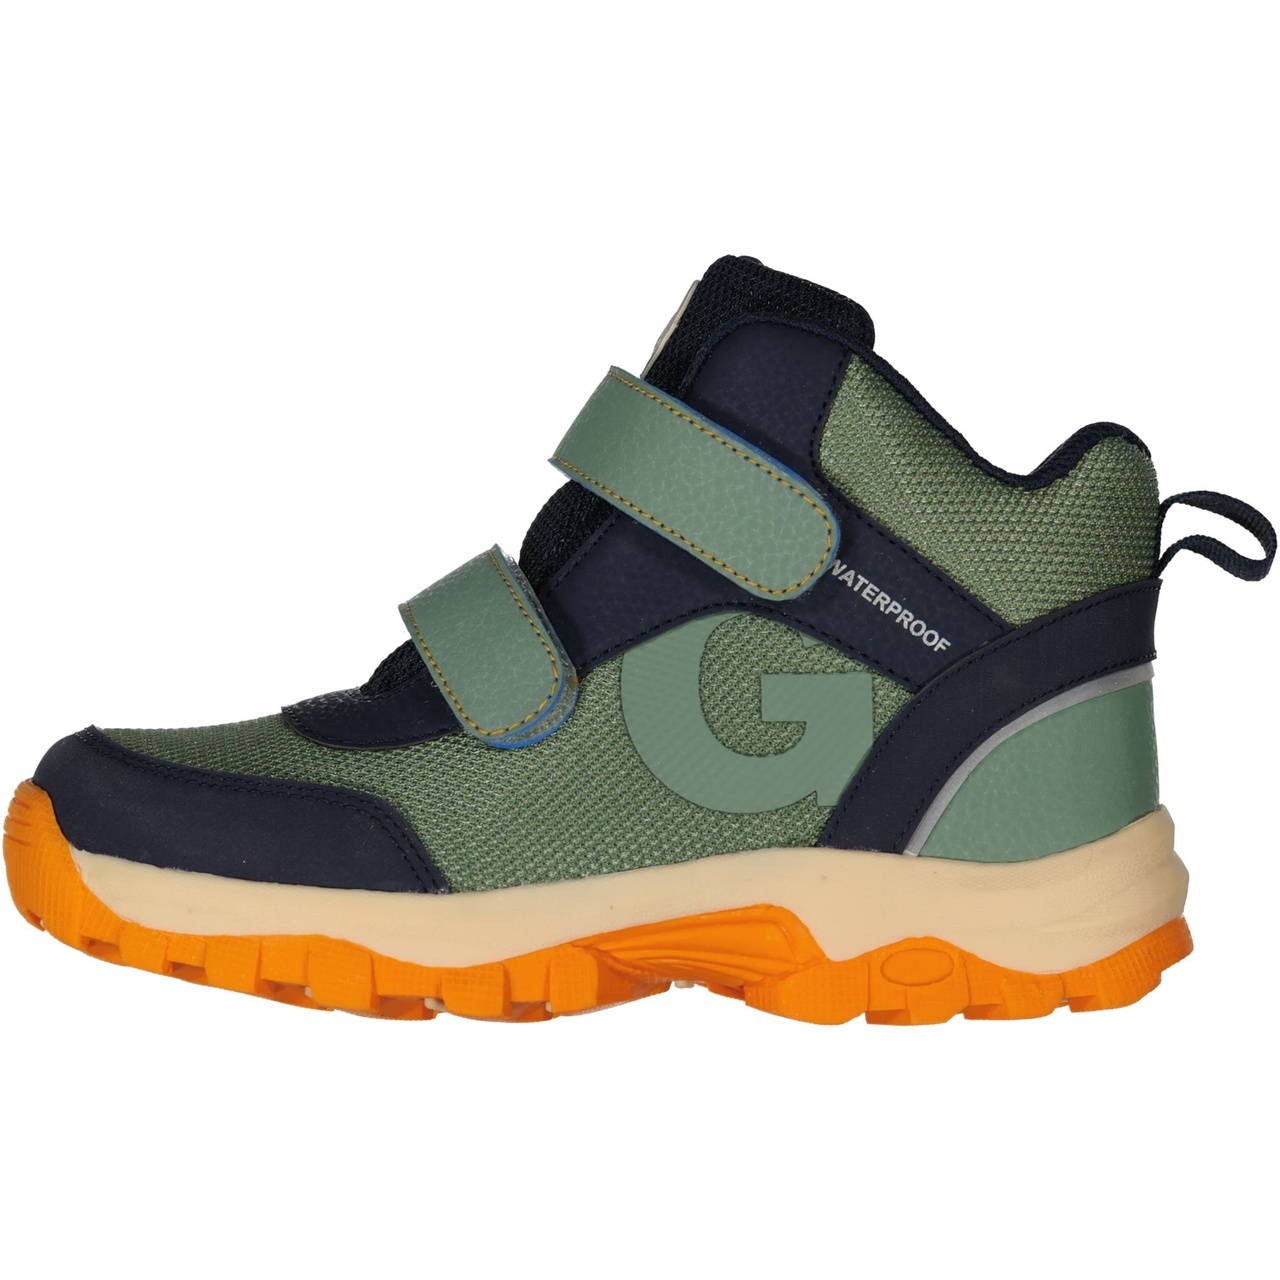 All weather shoes Moss green  35 (23 cm)